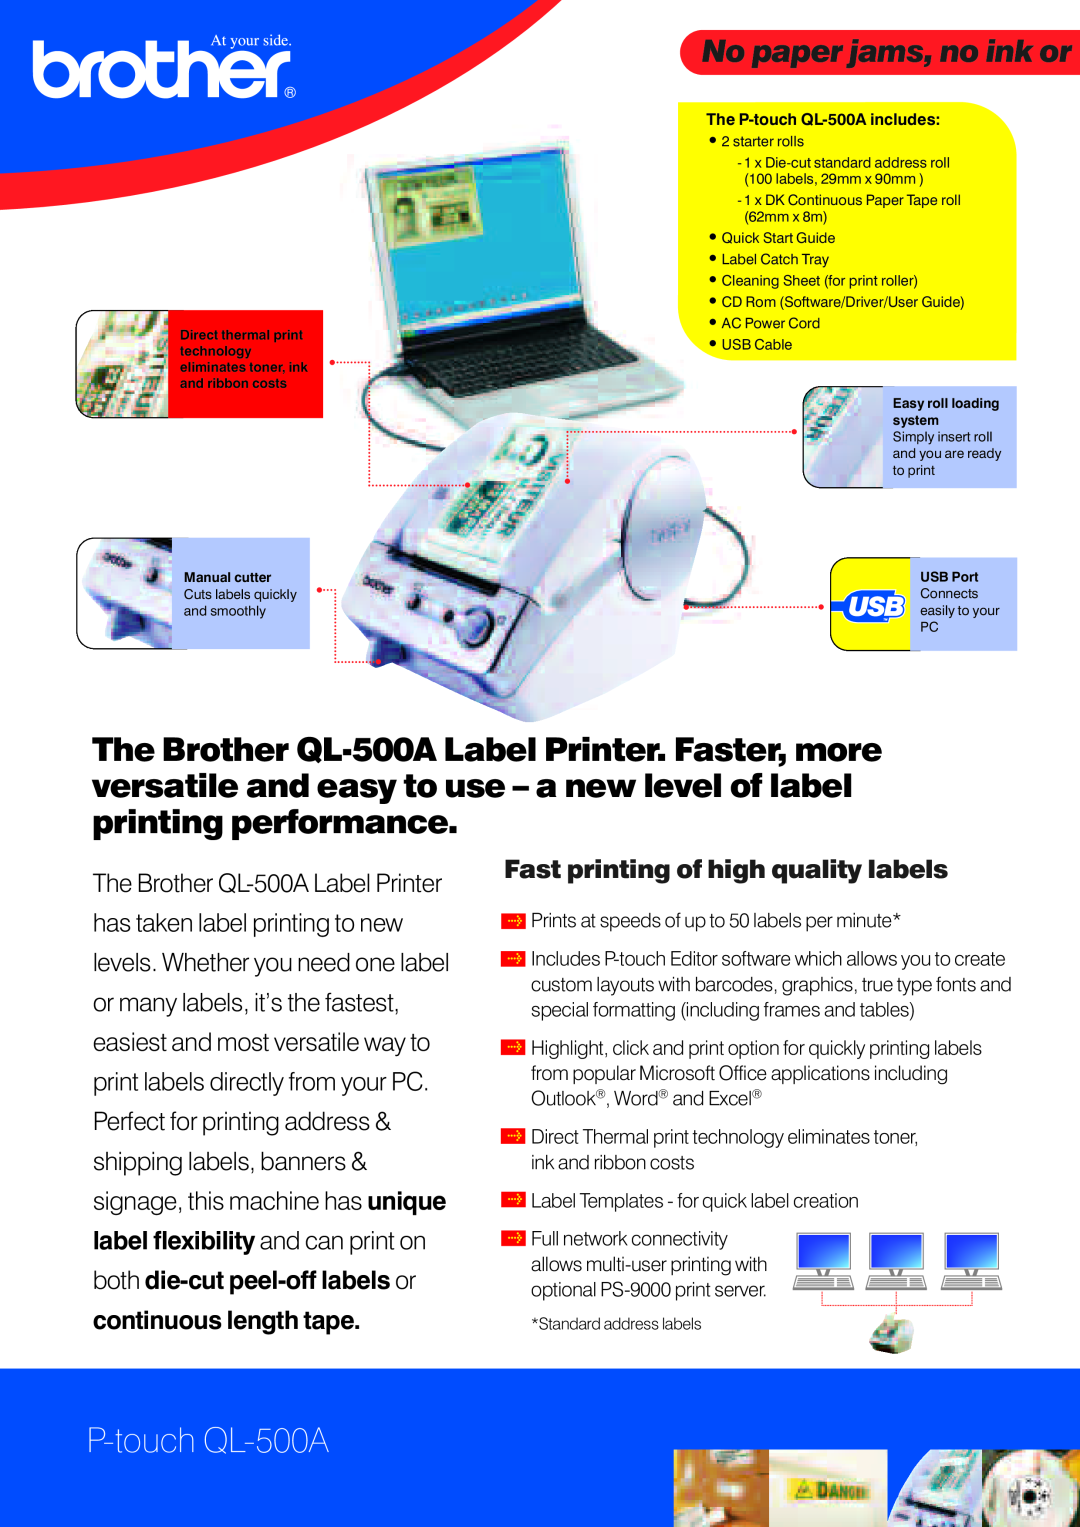 Brother manual P-touch QL-500A, No paper jams, no ink or, Fast printing of highquality labels 